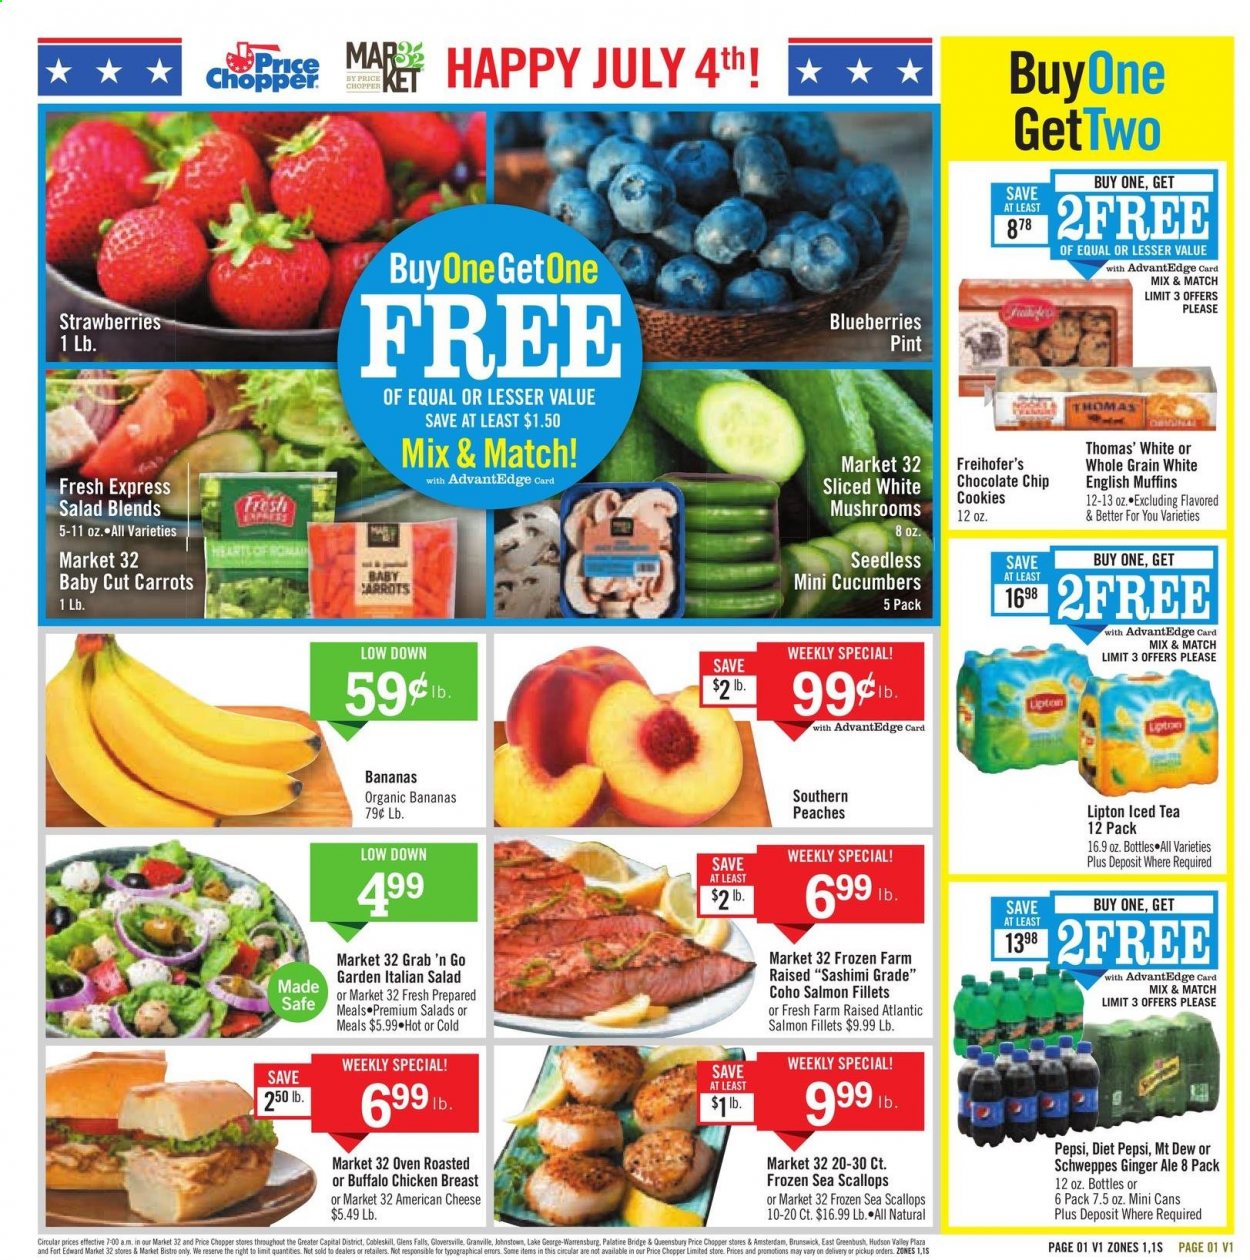 thumbnail - Price Chopper Flyer - 07/04/2021 - 07/10/2021 - Sales products - mushrooms, organic bananas, english muffins, carrots, cucumber, bananas, blueberries, strawberries, salmon, salmon fillet, scallops, american cheese, cheese, cookies, chocolate chips, ginger ale, Schweppes, Pepsi, Lipton, ice tea, Diet Pepsi, chicken breasts, peaches. Page 1.